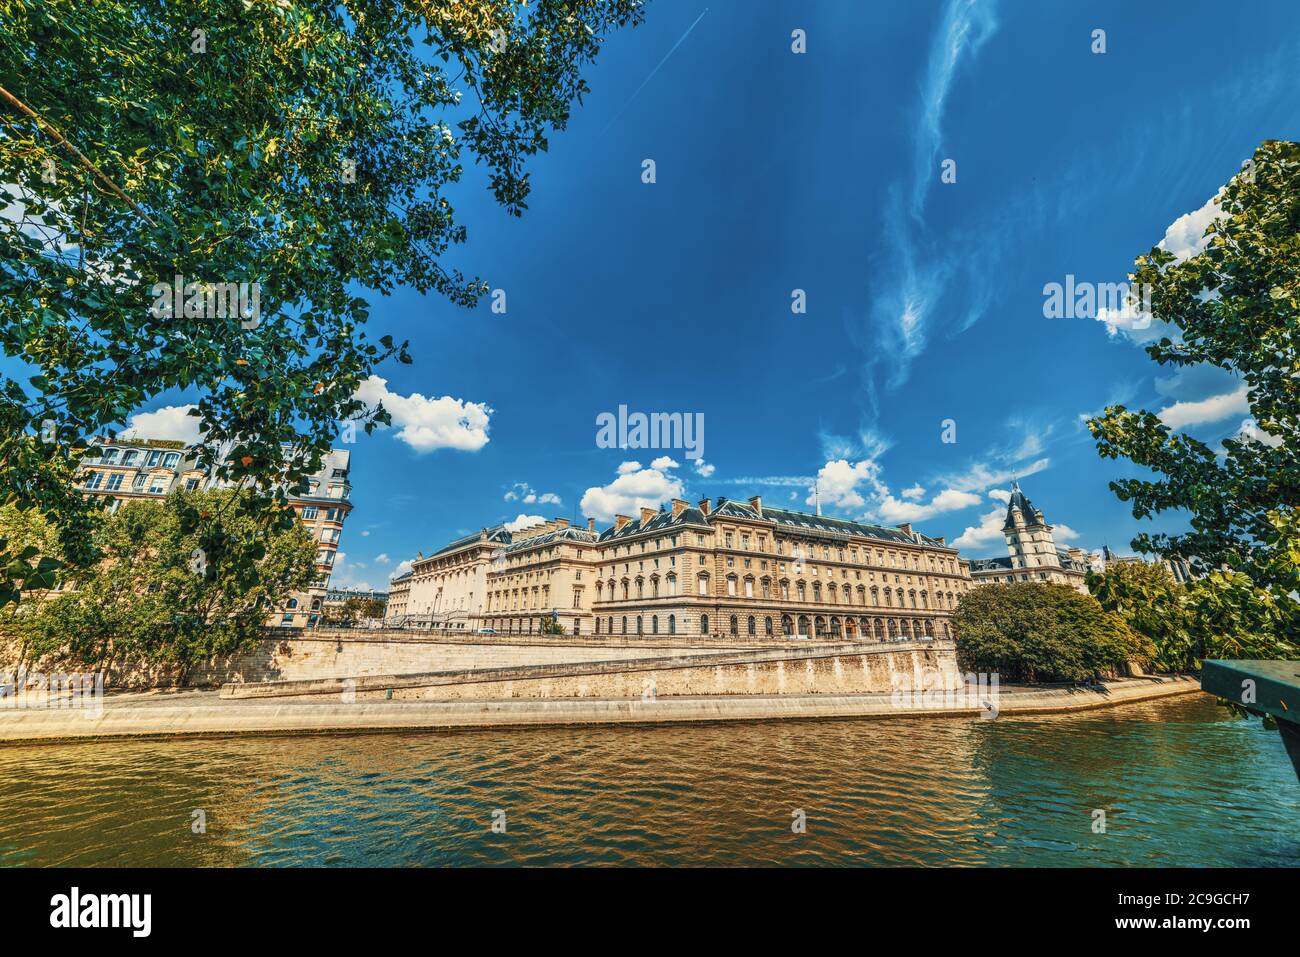 Police Judiciaire palace by Seine river in Paris, France Stock Photo